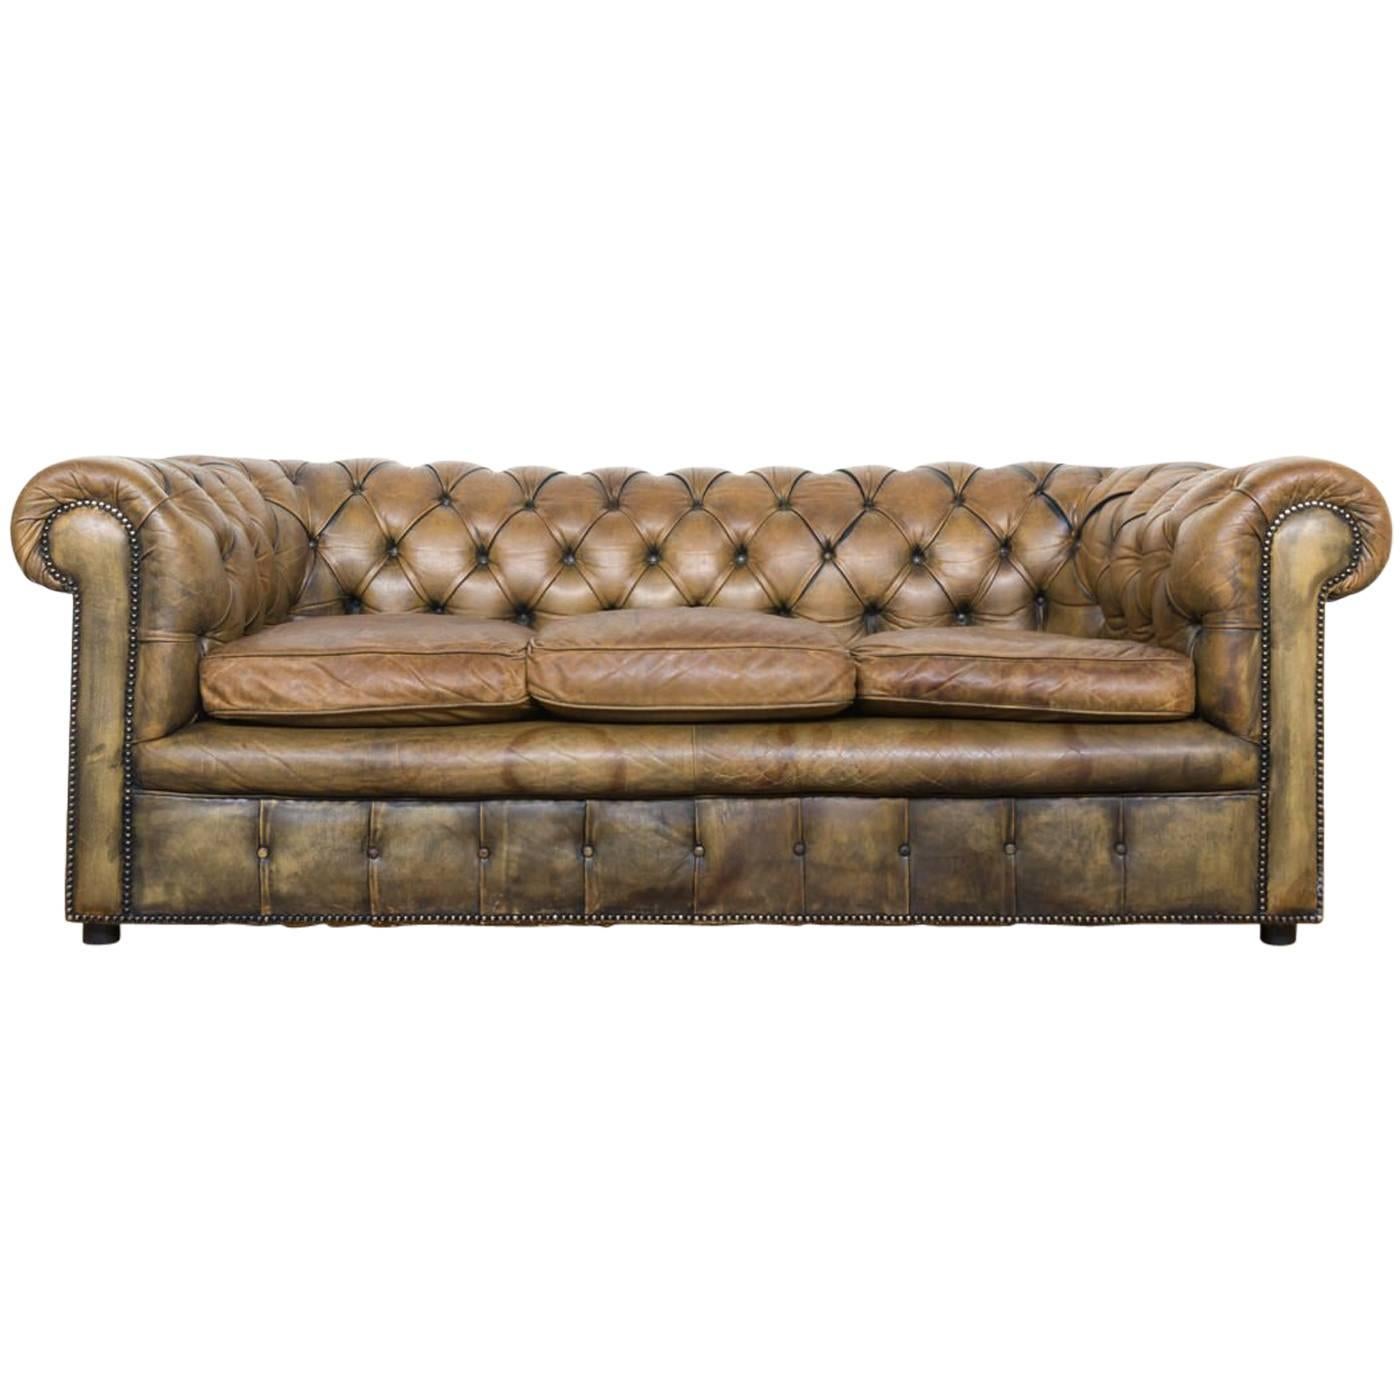 Vintage 1950s-1960s Chesterfield Sofa in Hand Dyed Tan Olive Green Leather